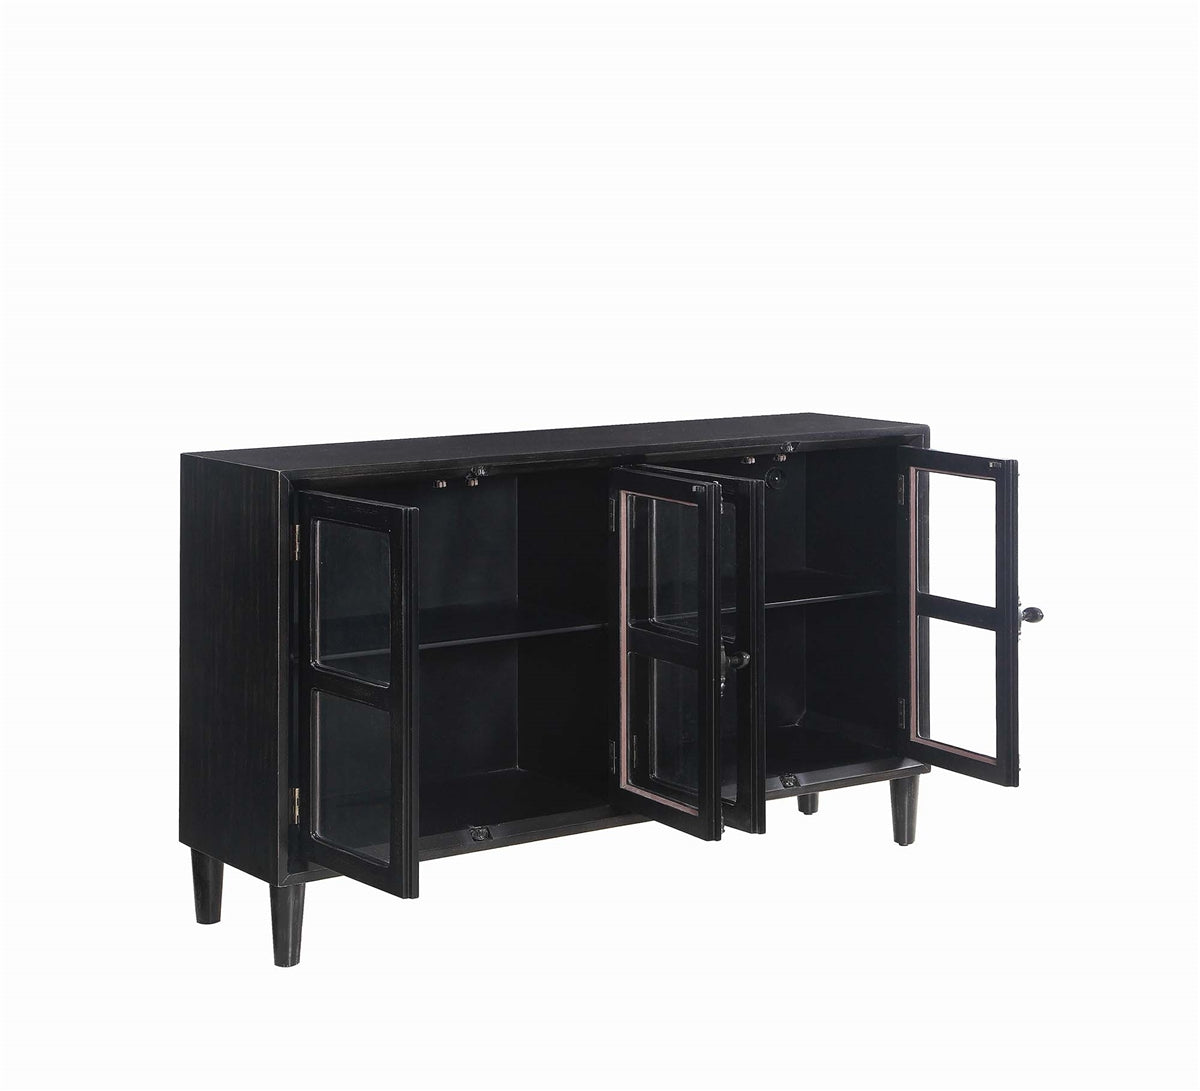 Santee Antique French Inspired Black Finish Accent Cabinet